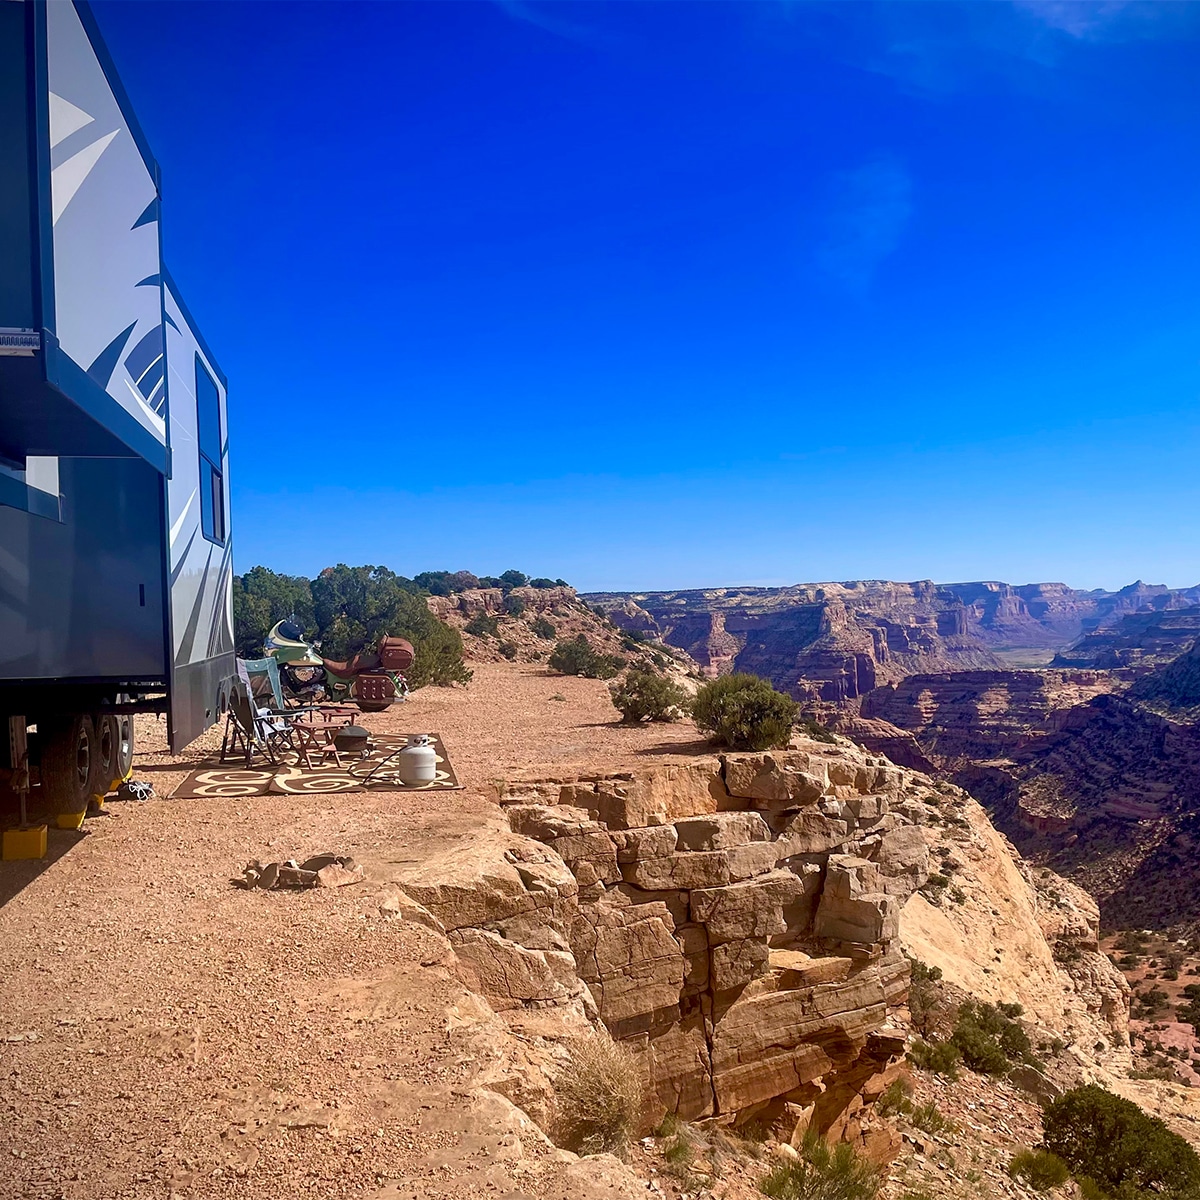 Our 5th Wheel RV parked on the edge of the Little Grand Canyon in Utah. 